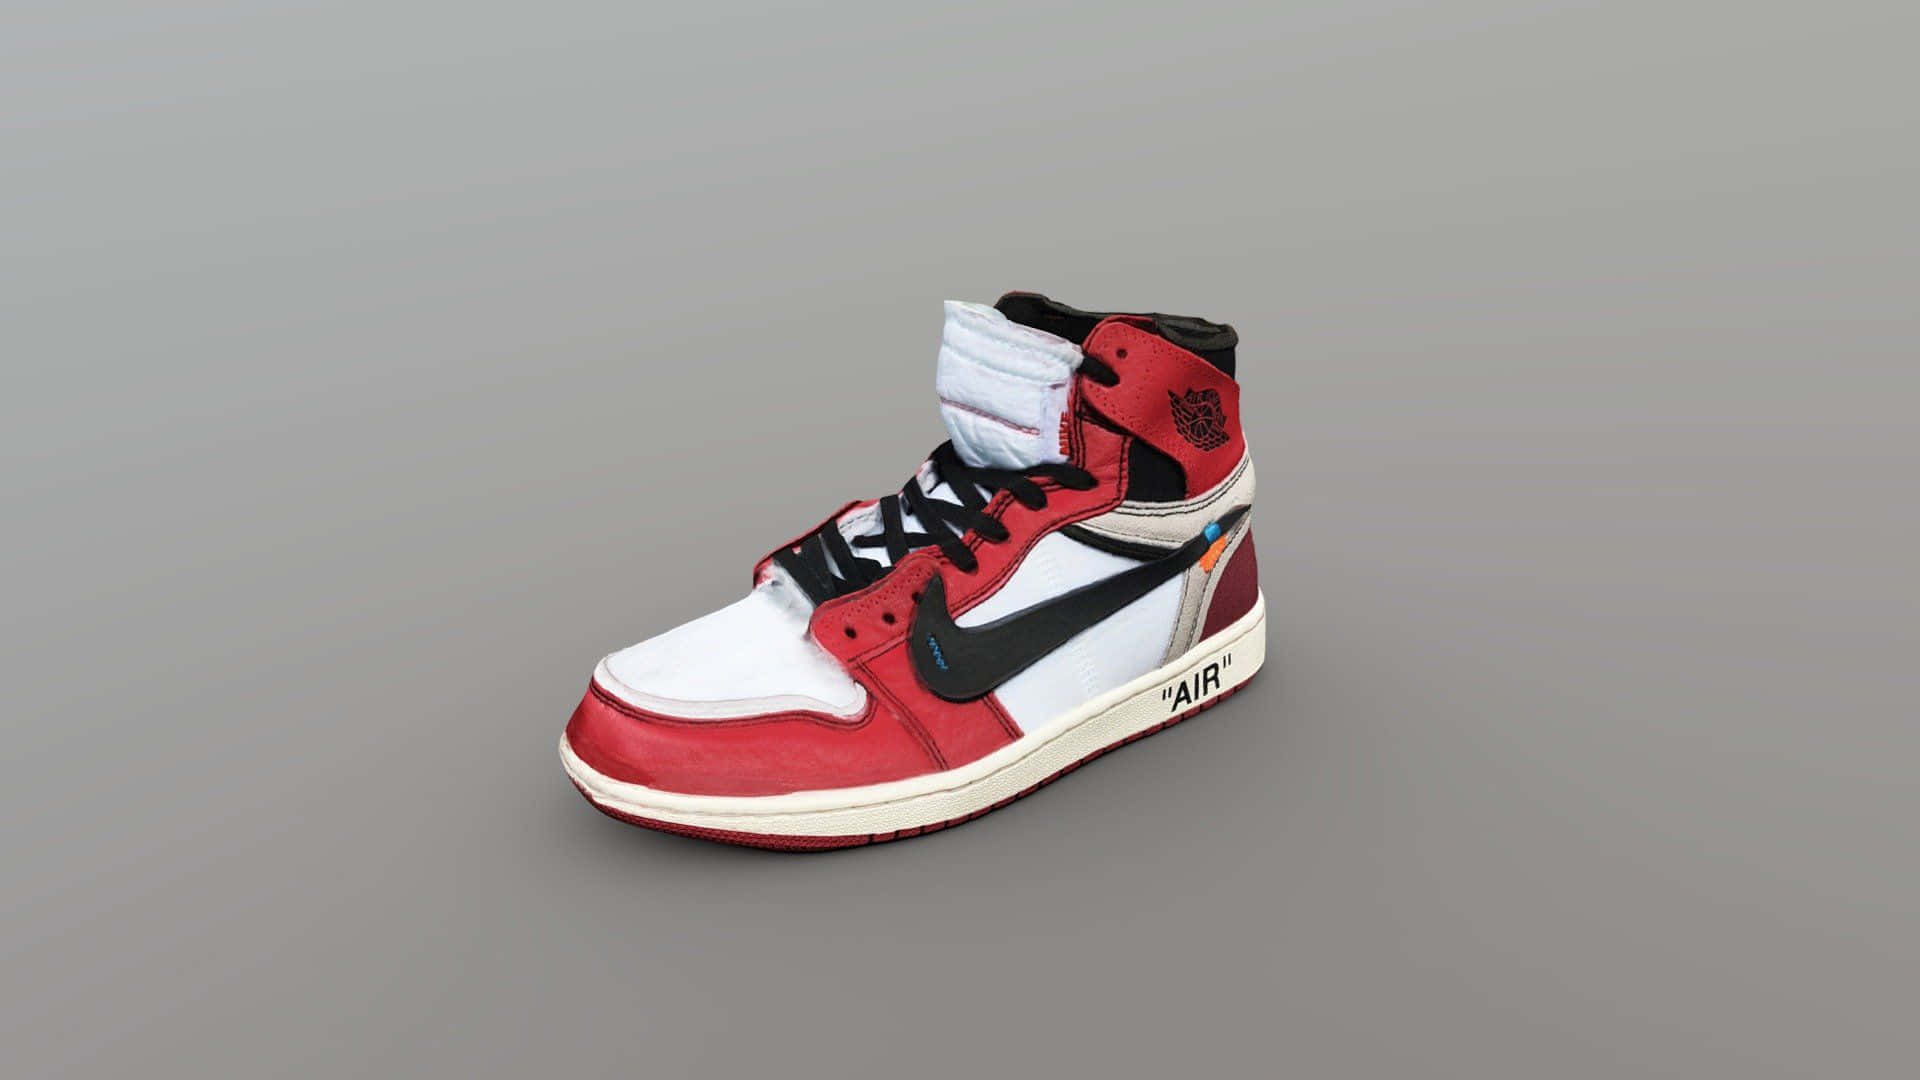 Jump high and stand out with red Jordan shoes. Wallpaper